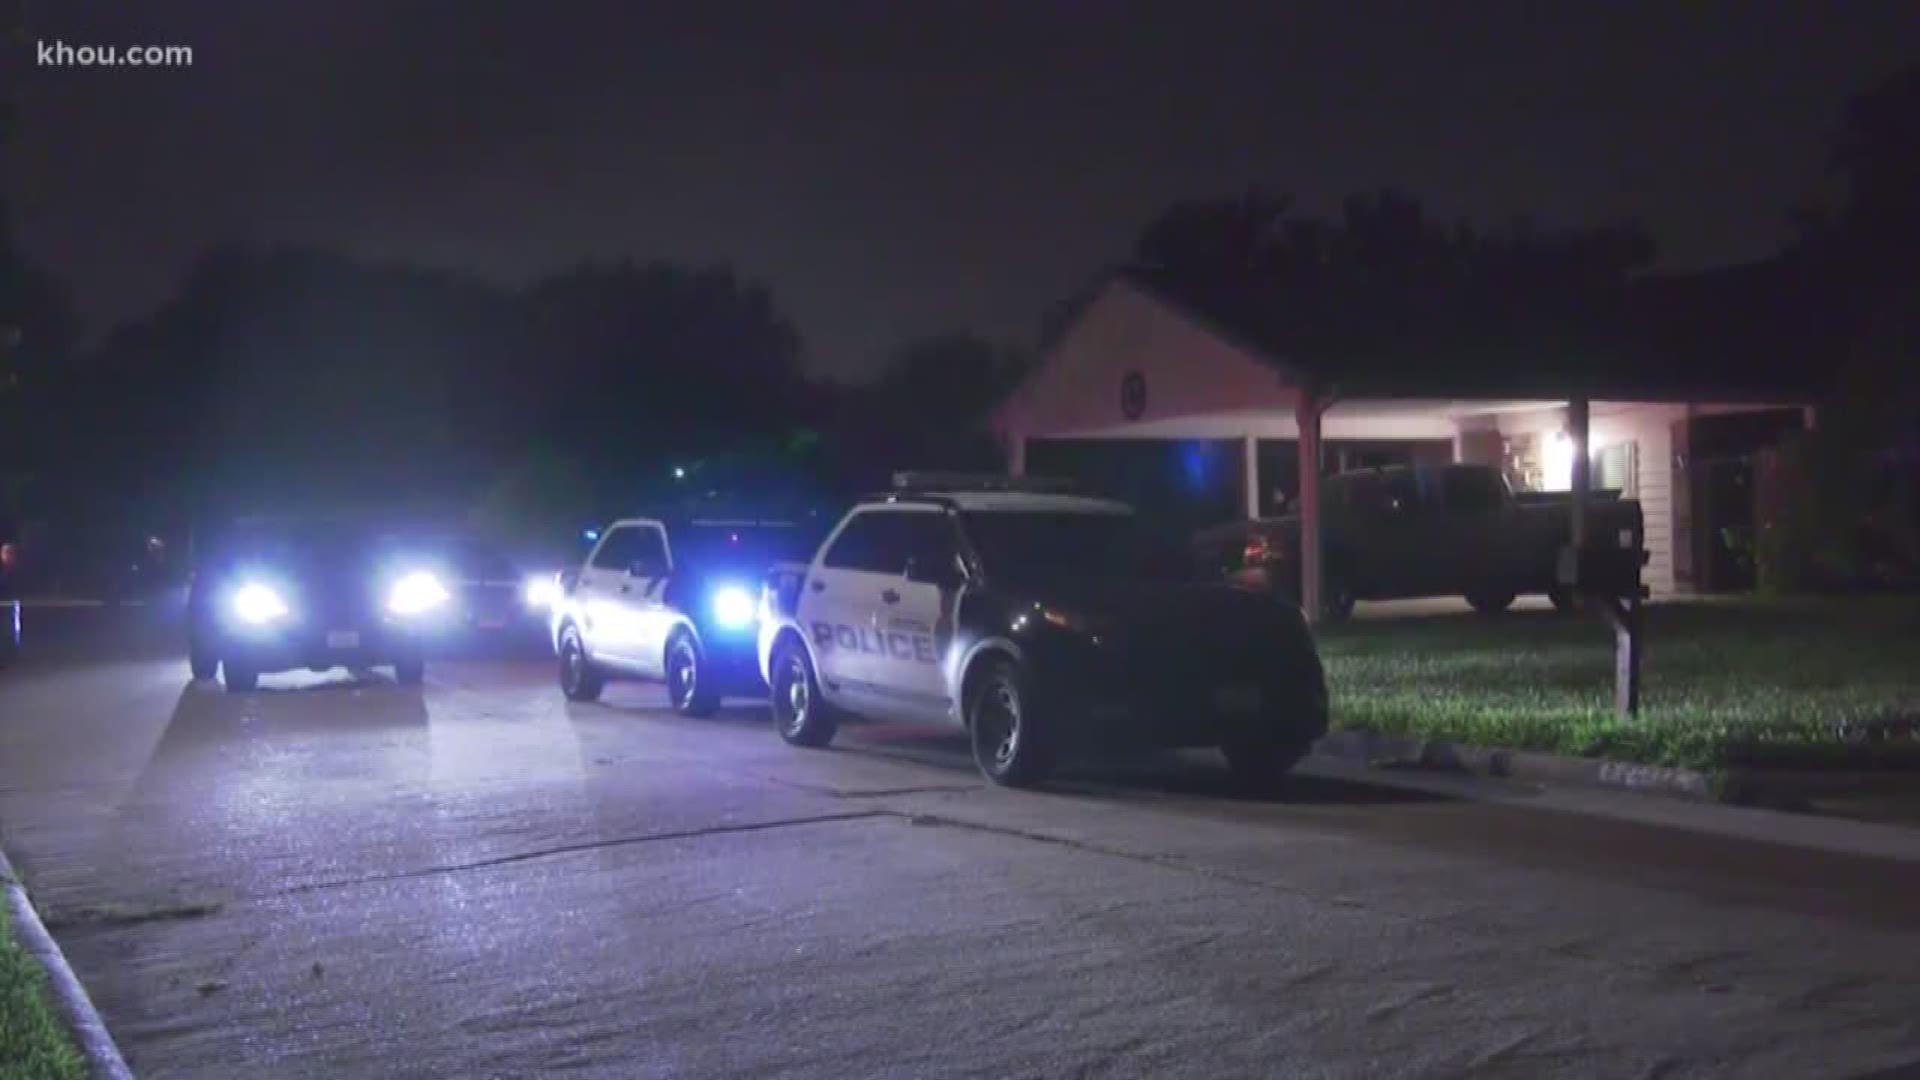 A group of burglars are on the run after a home invasion in southwest Houston. The homeowner was shot in the leg, but he is expected to survive.